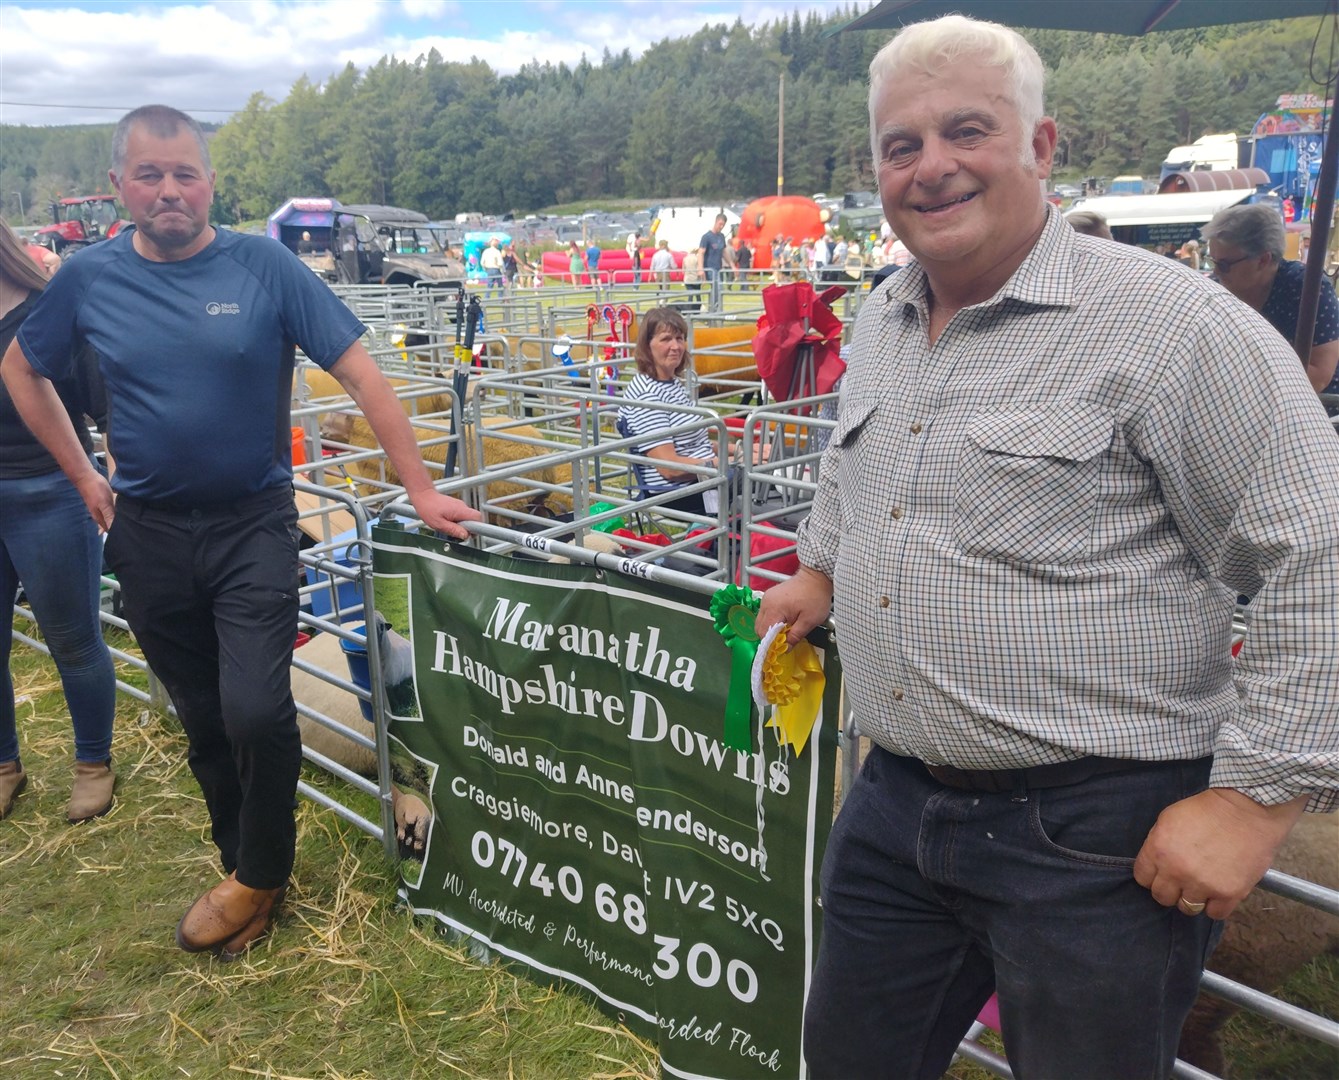 'It's a great show to meet old friends' said Donald Henderson (right), pictured with crofter Gilbert Bain from Elgin.